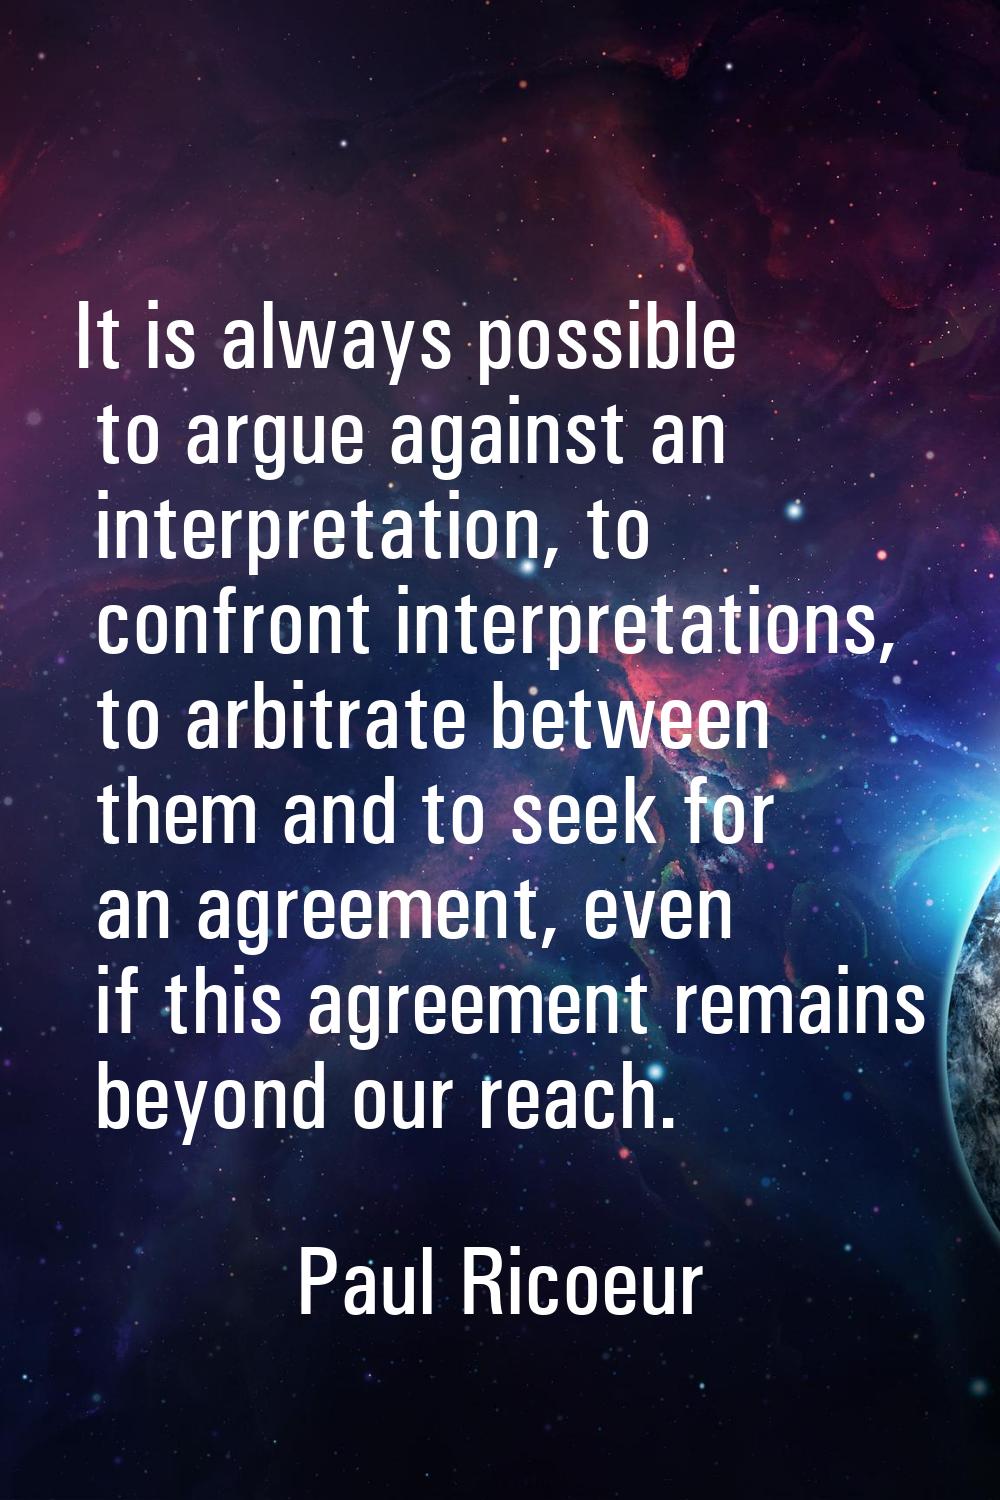 It is always possible to argue against an interpretation, to confront interpretations, to arbitrate